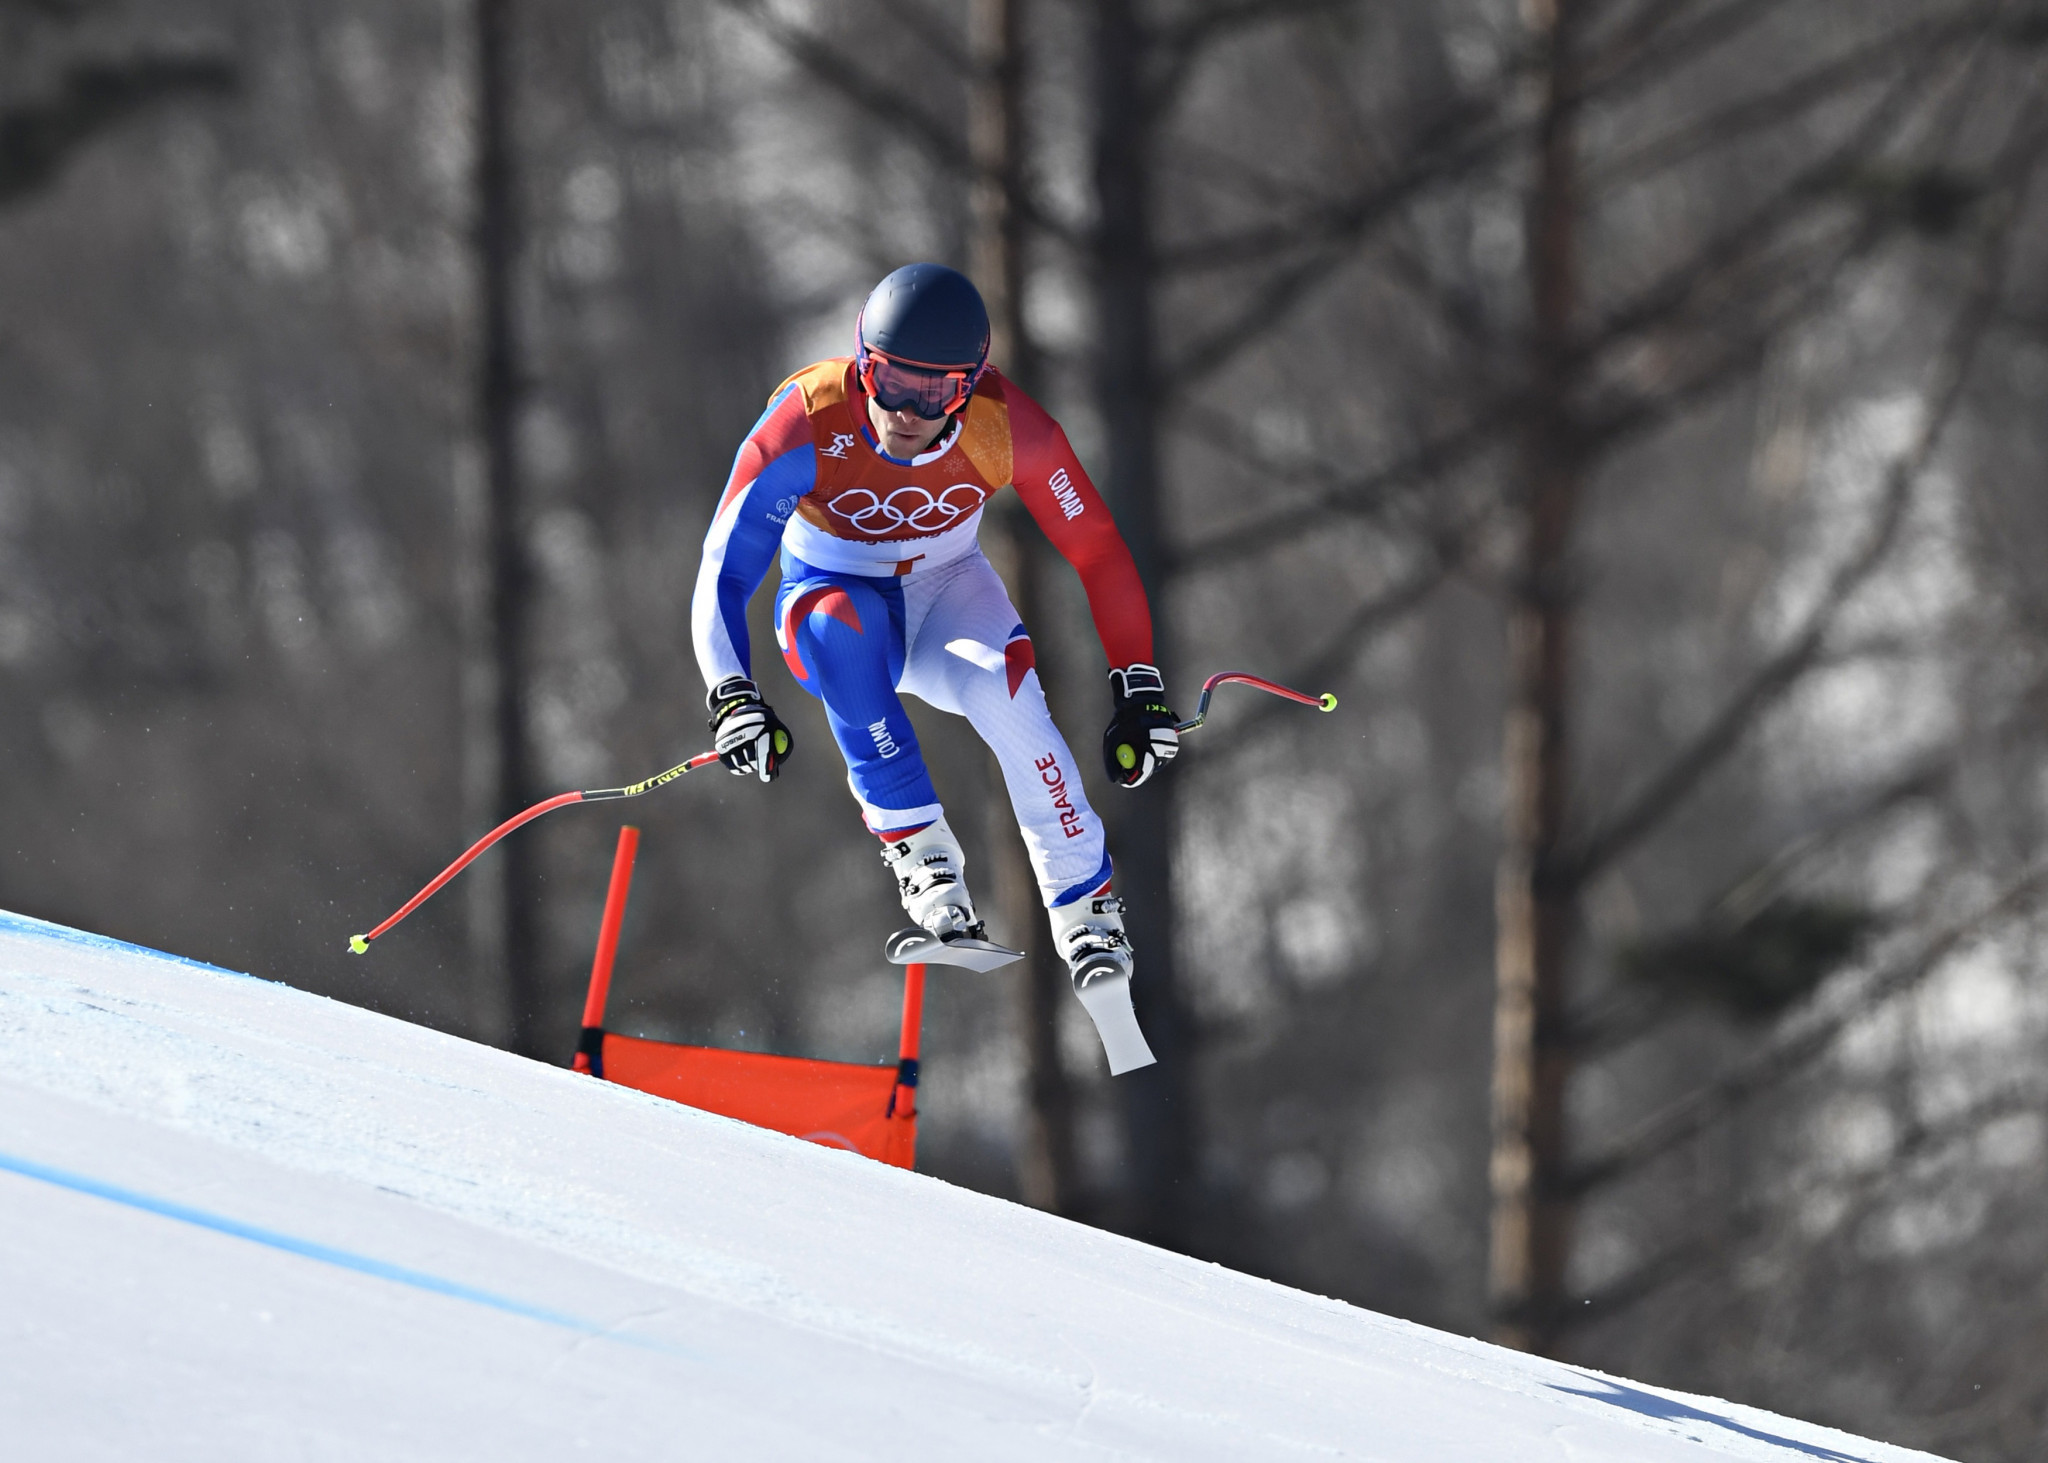 France's Alexis Pinturault finished a close second to take the silver medal ©Getty Images